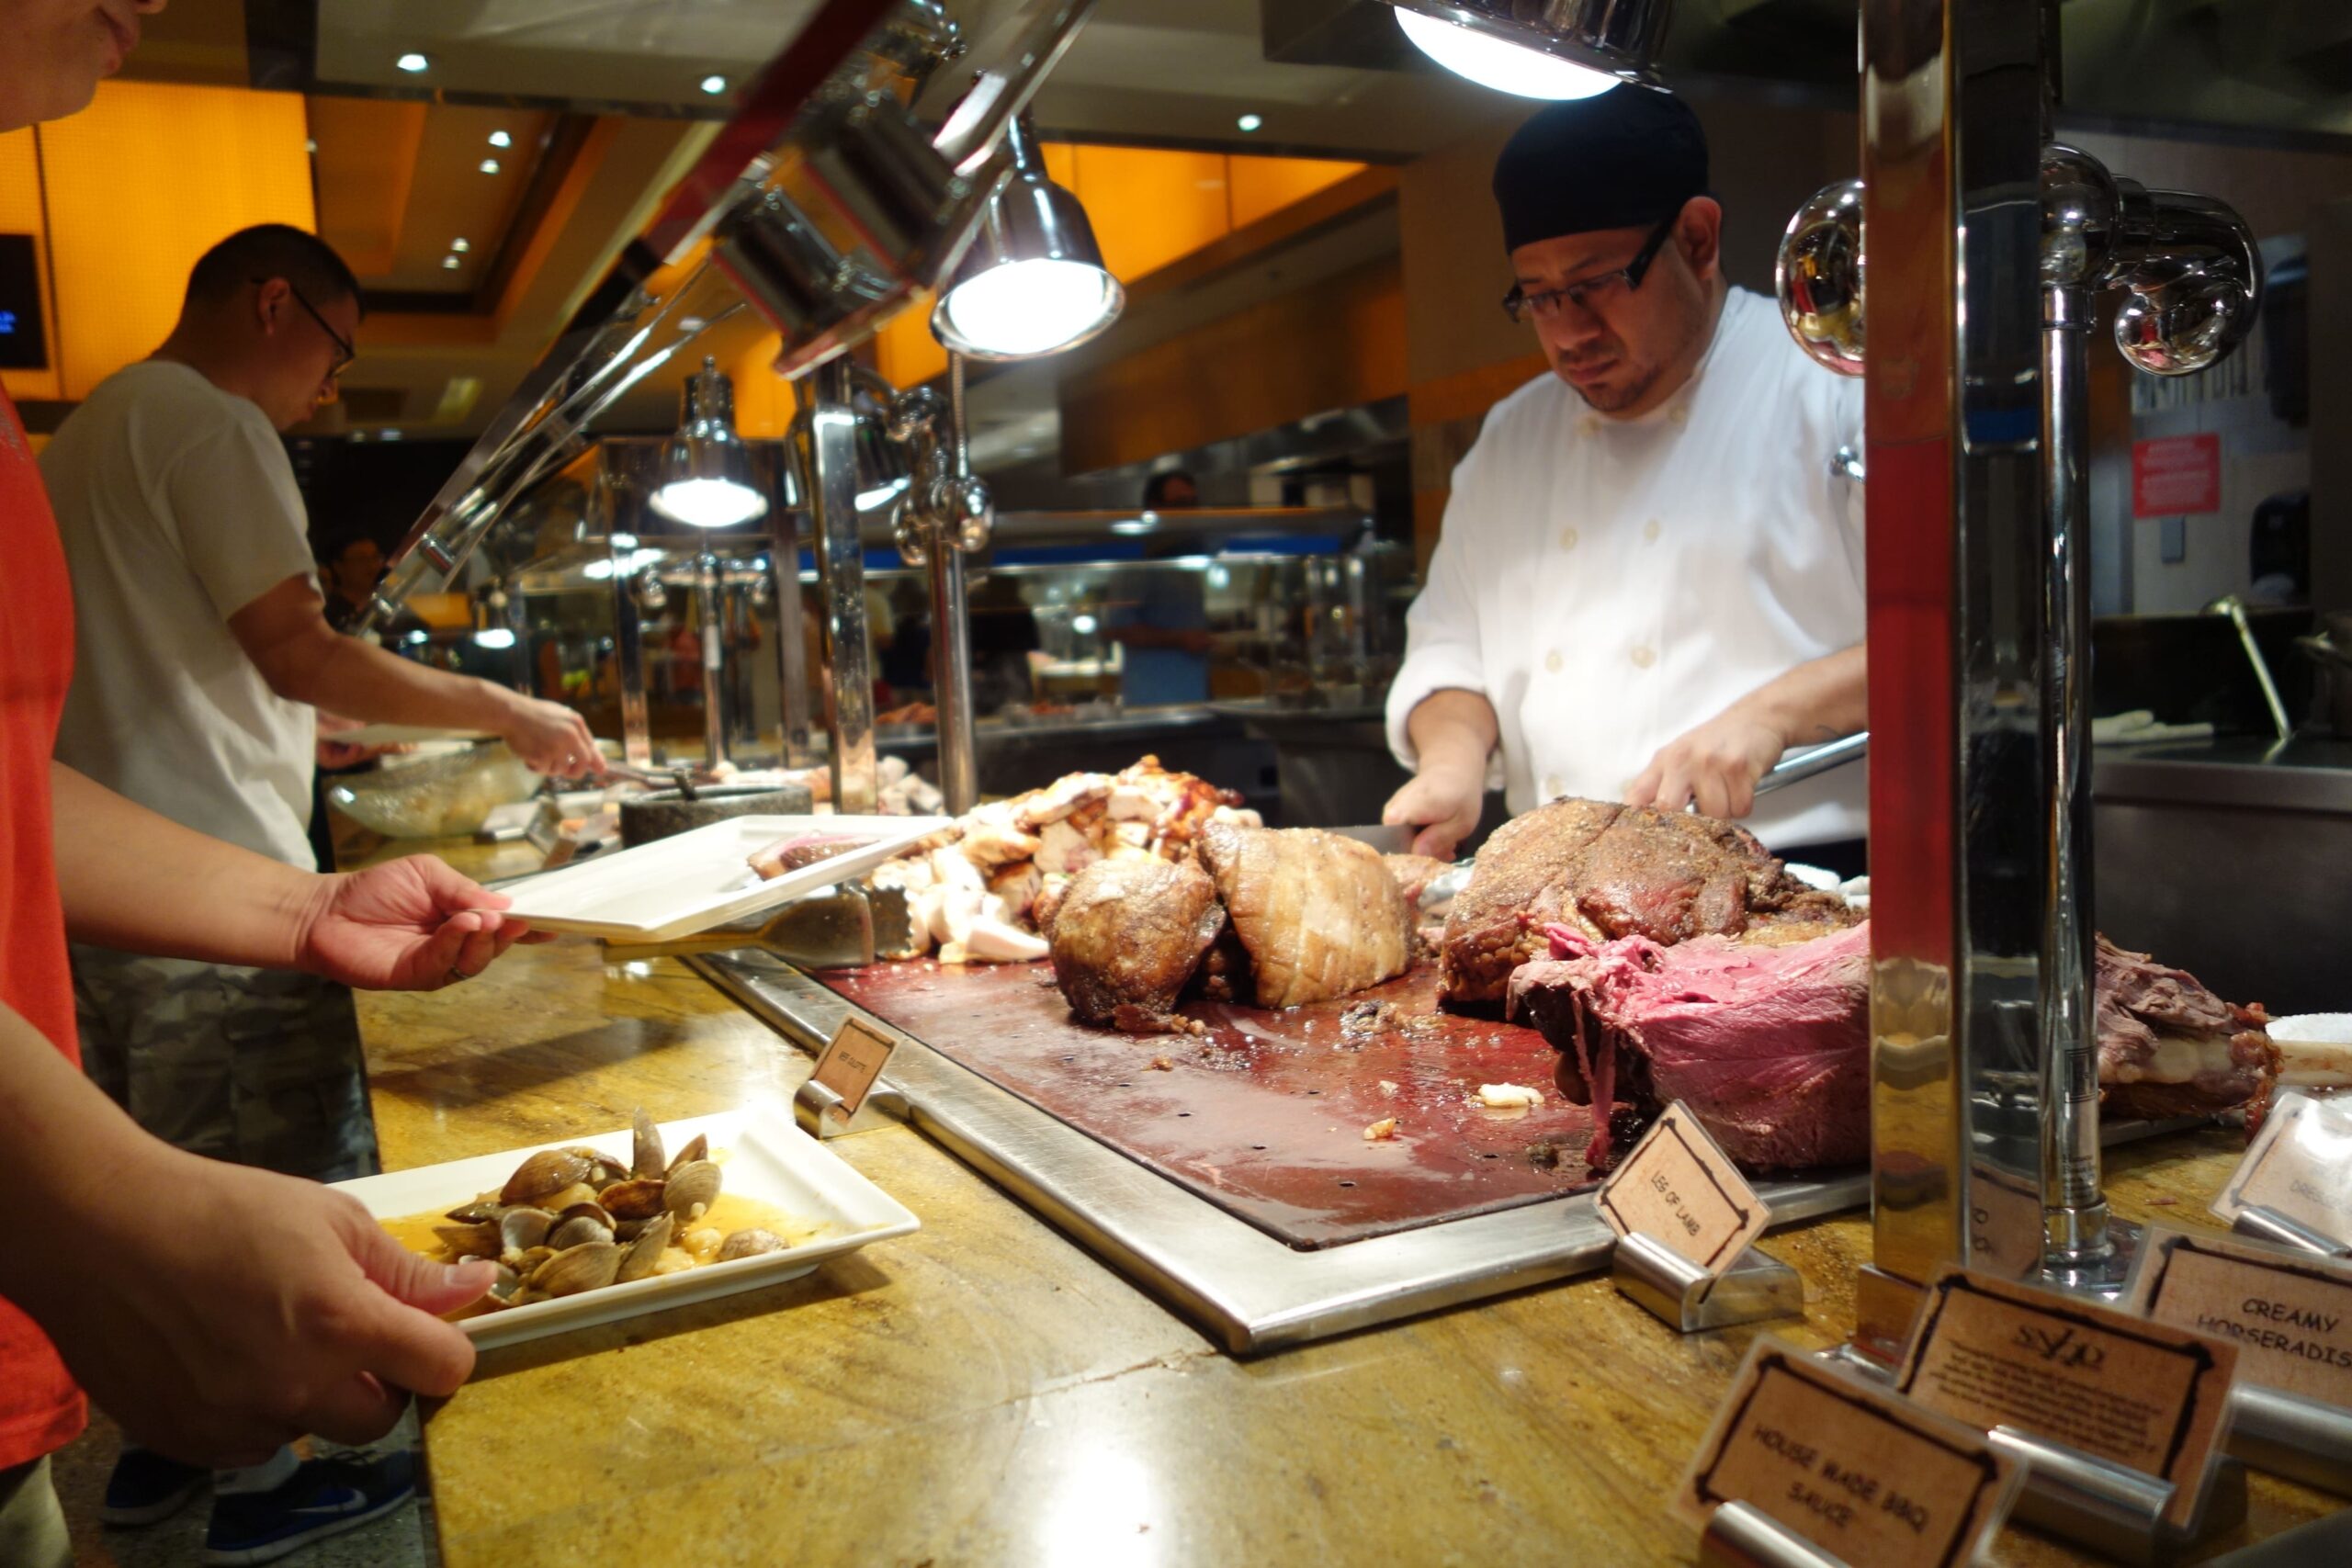 A chef cutting a freshly made leg of lamb at the Wicked Spoon Buffet at the Cosmopolitan Las Vegas